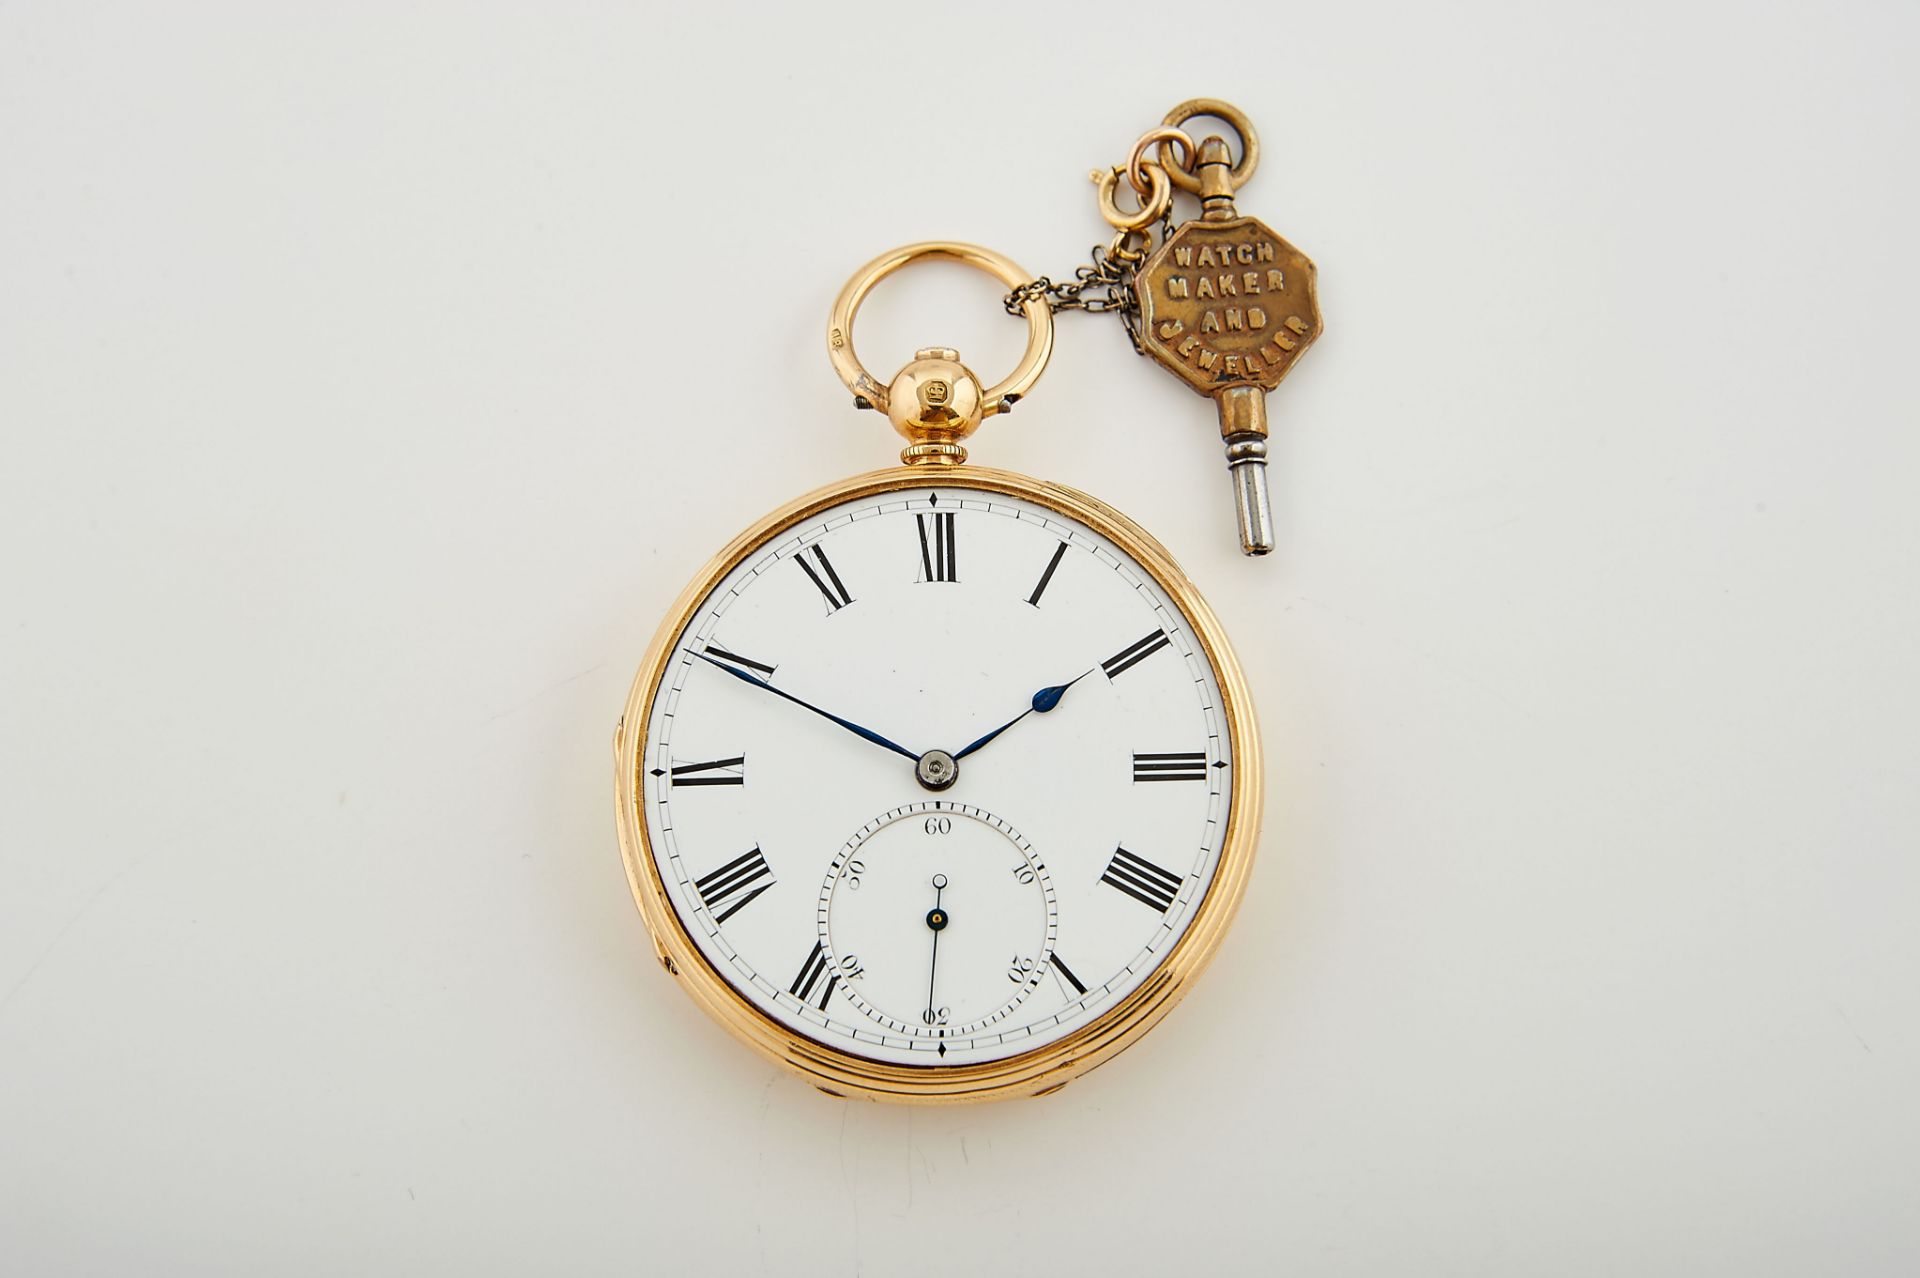 A HUX & SON Pocket Watch, 750/1000 gold case nº 3403, decoration en guilloche and engraved with